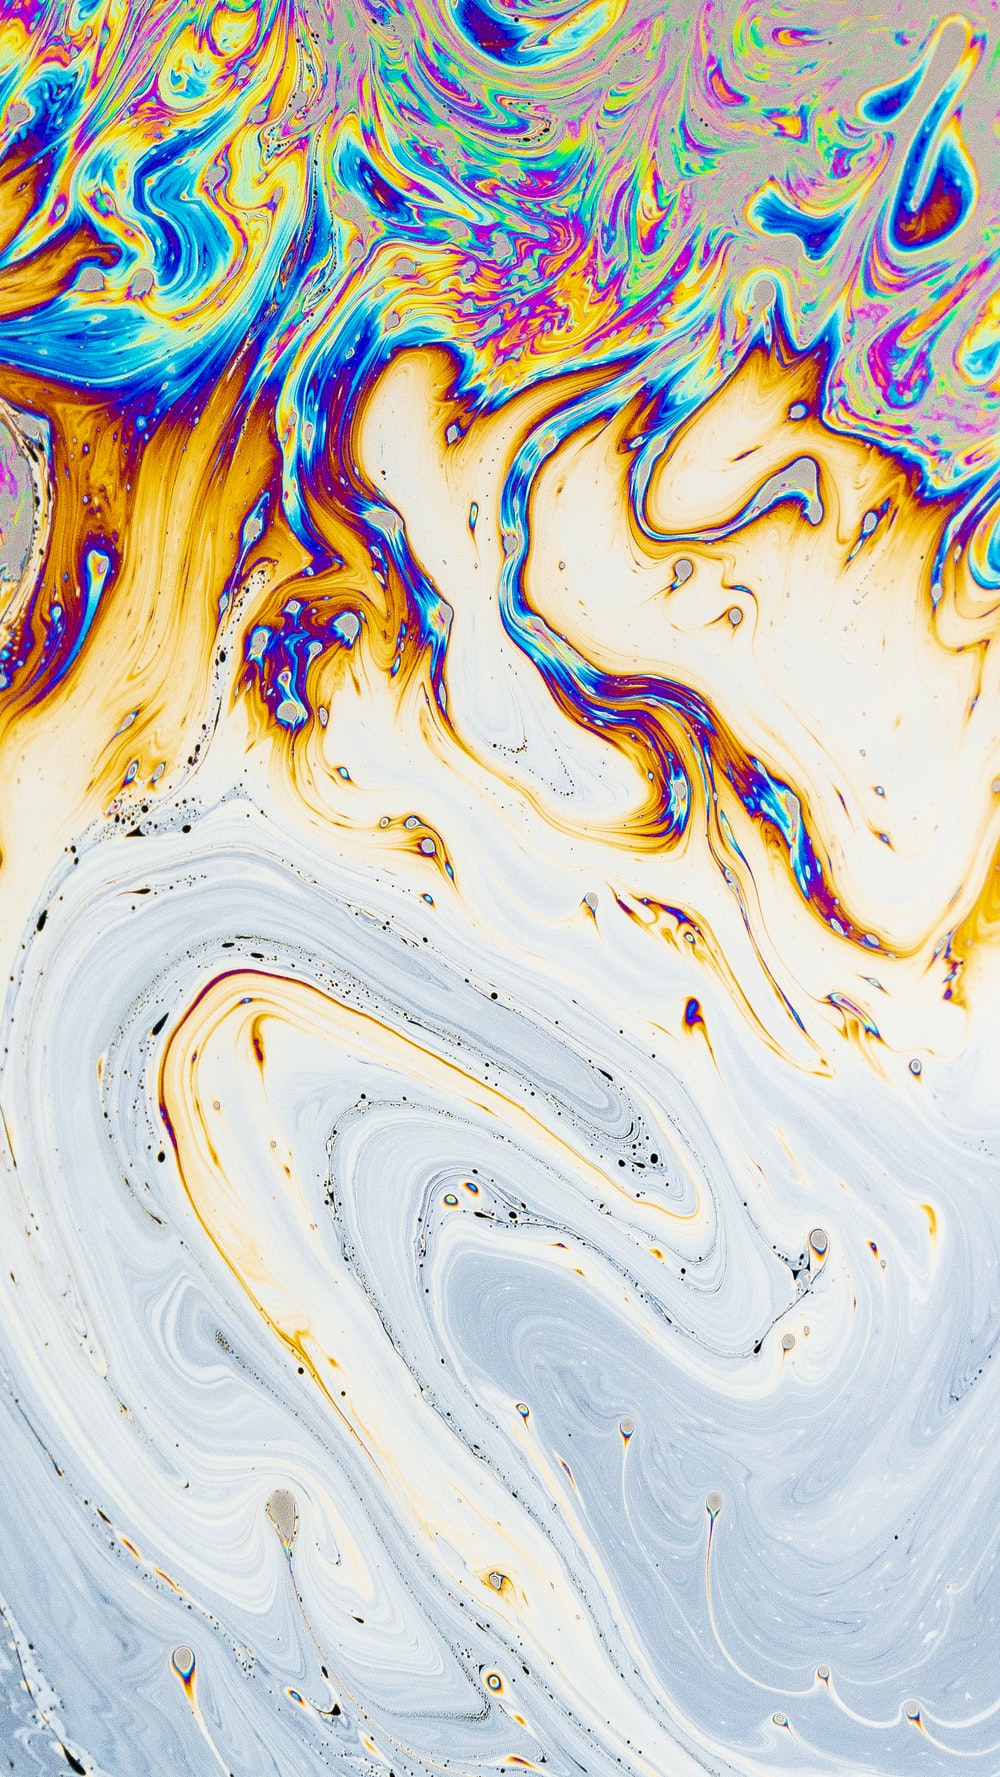 Oil Slick Picture. Download Free Image